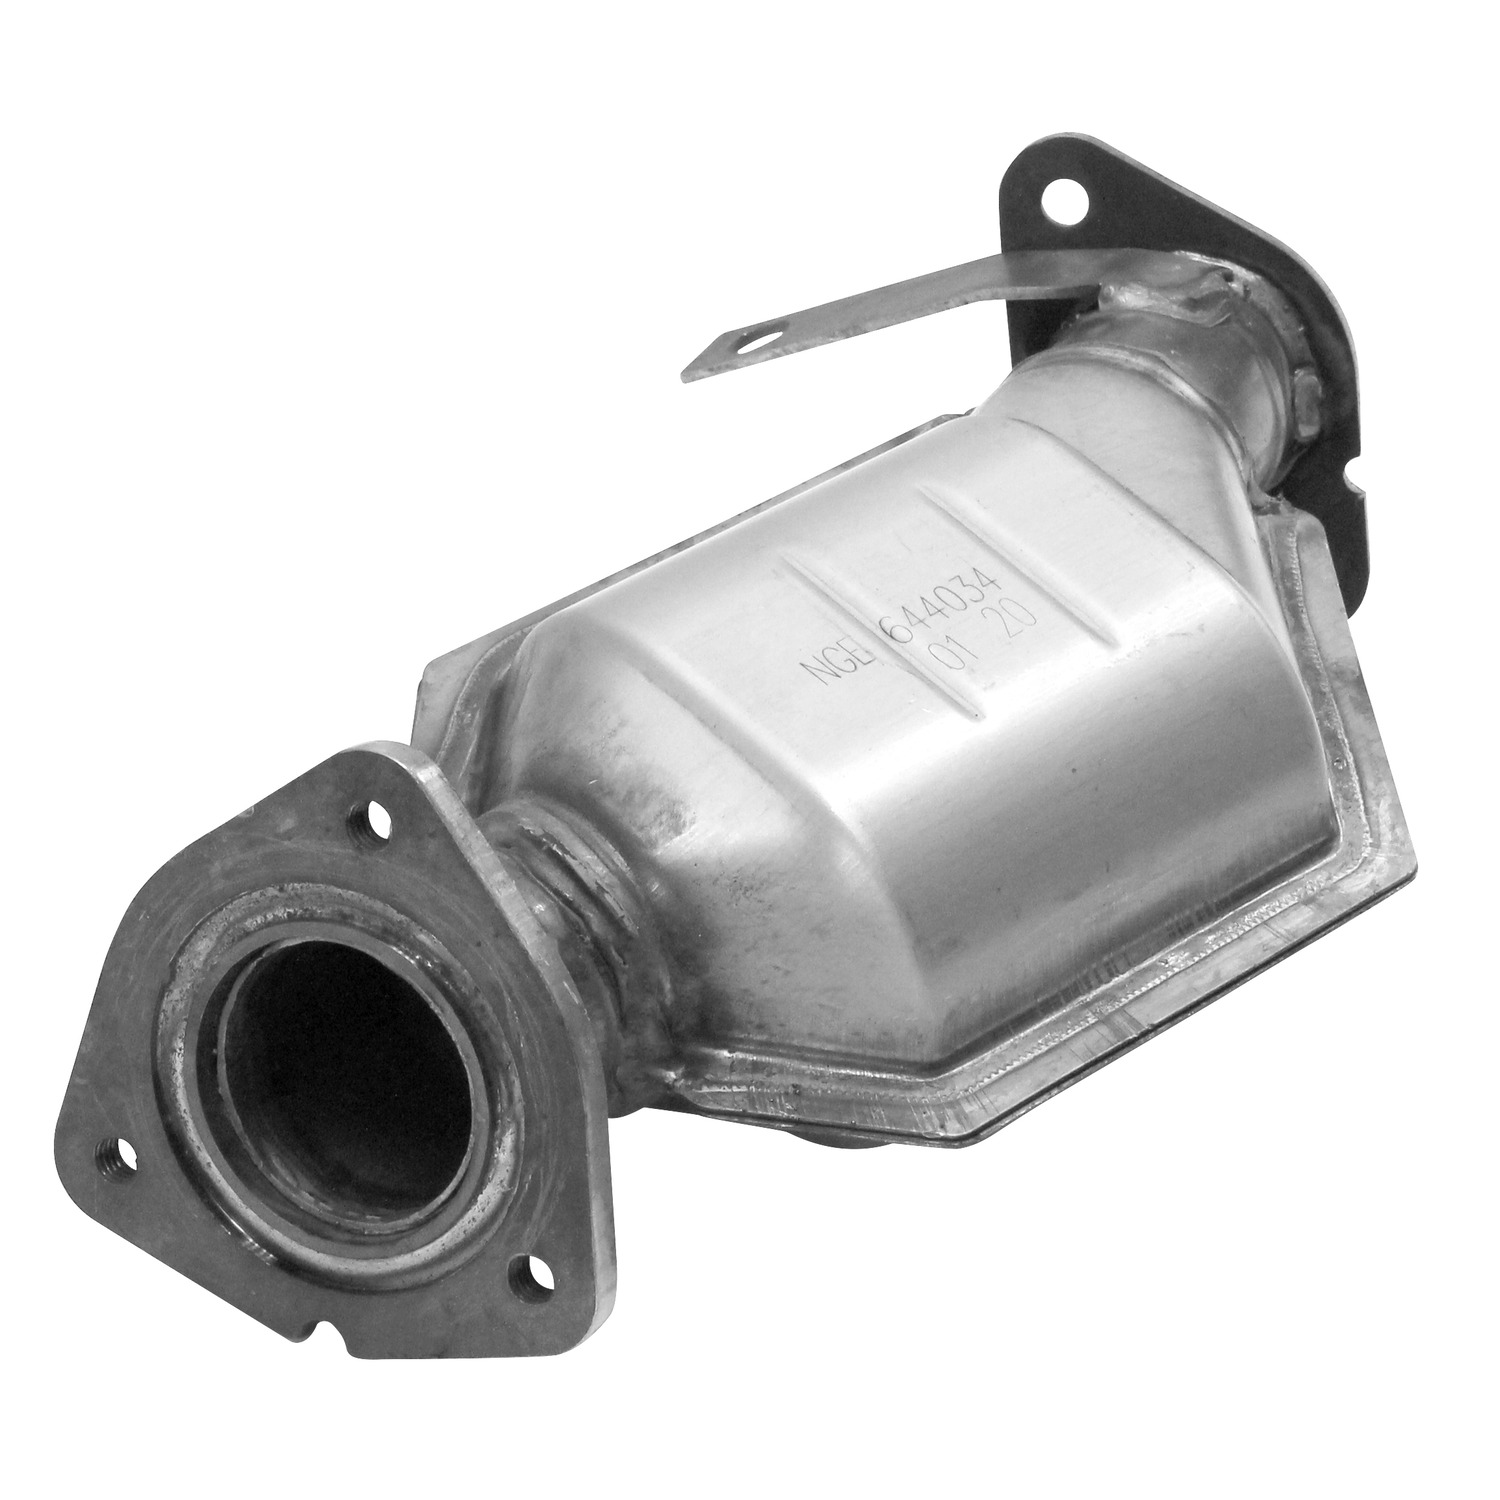 AP Exhaust Catalytic Converter-Direct Fit P/N:644034 Fits select: 2009-2017 CHEVROLET TRAVERSE, 2007-2016 GMC ACADIA - image 3 of 4